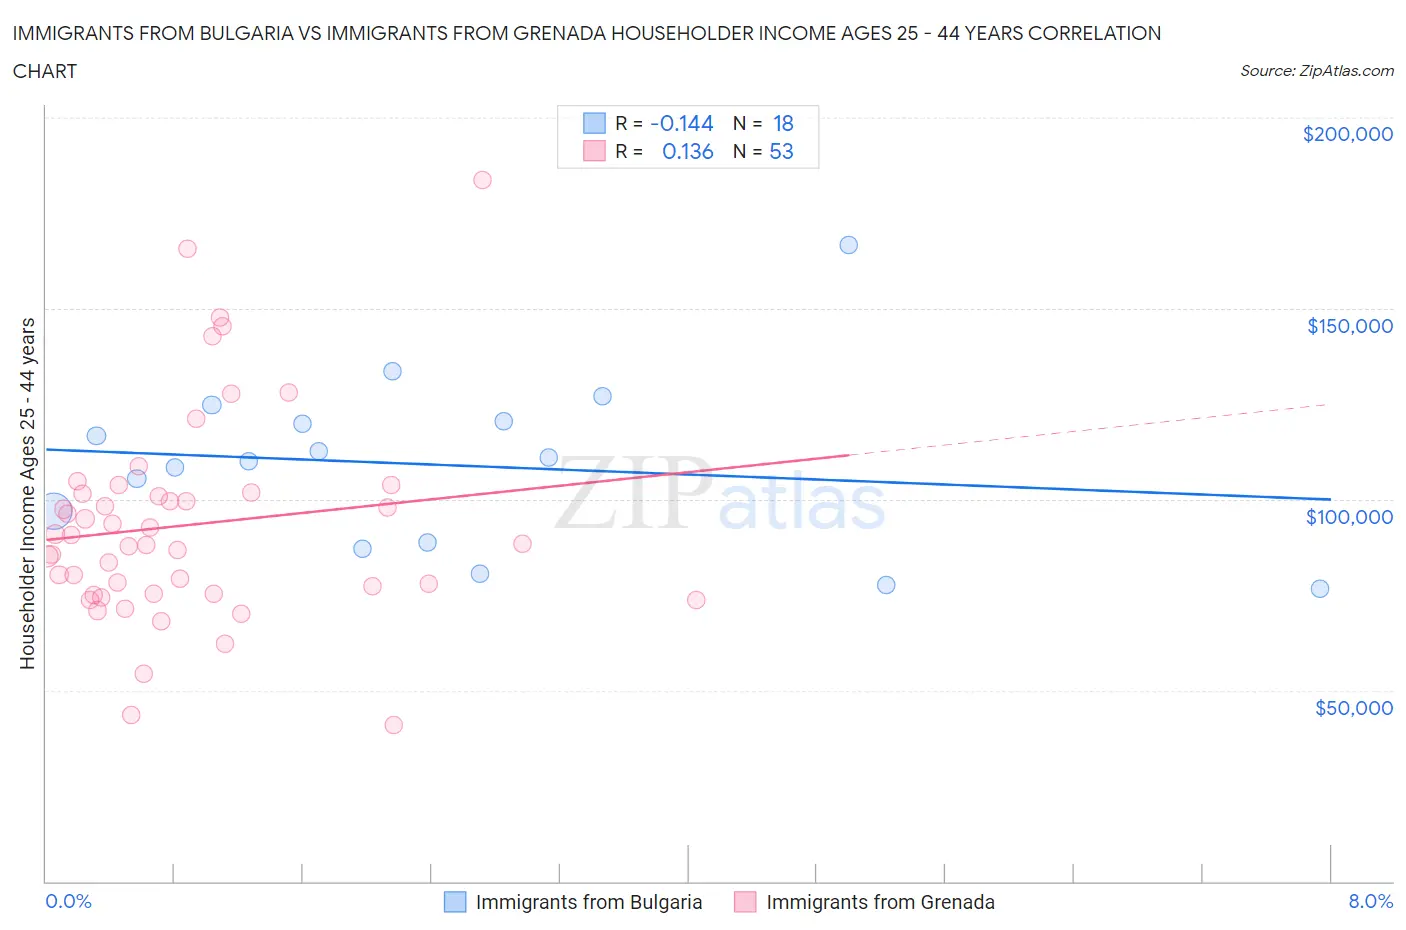 Immigrants from Bulgaria vs Immigrants from Grenada Householder Income Ages 25 - 44 years